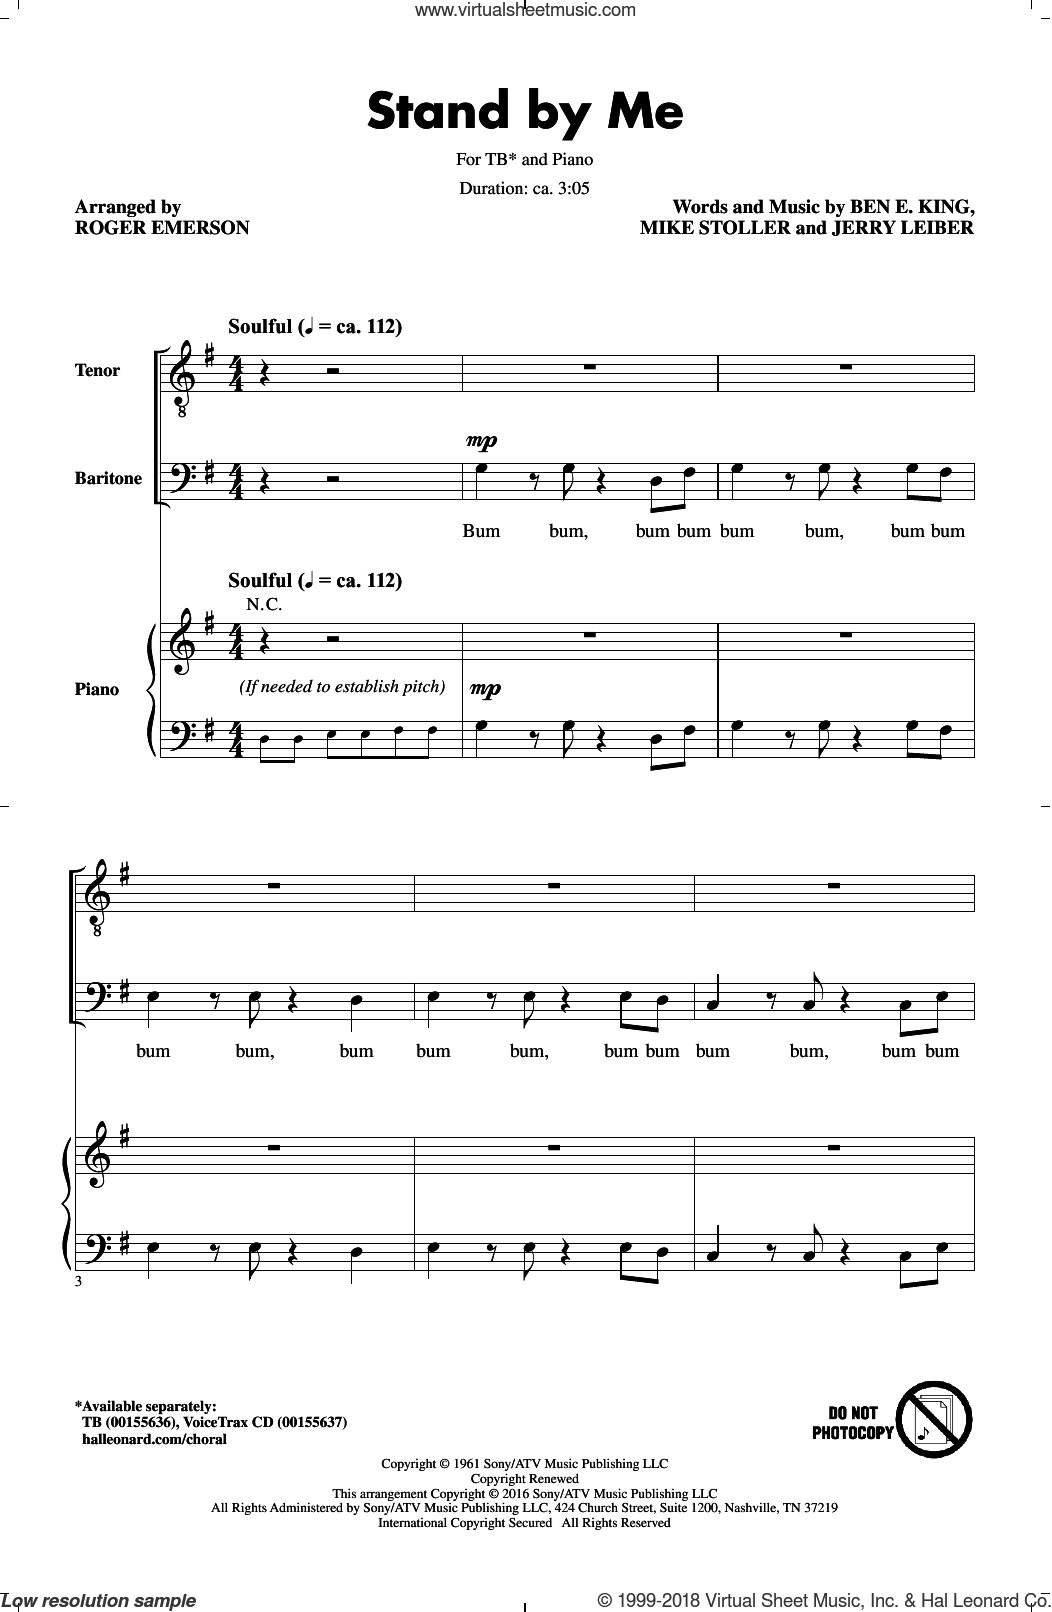 Stand By Me Chords Stoller Stand Me Arr Roger Emerson Sheet Music For Choir Tb Tenor Bass